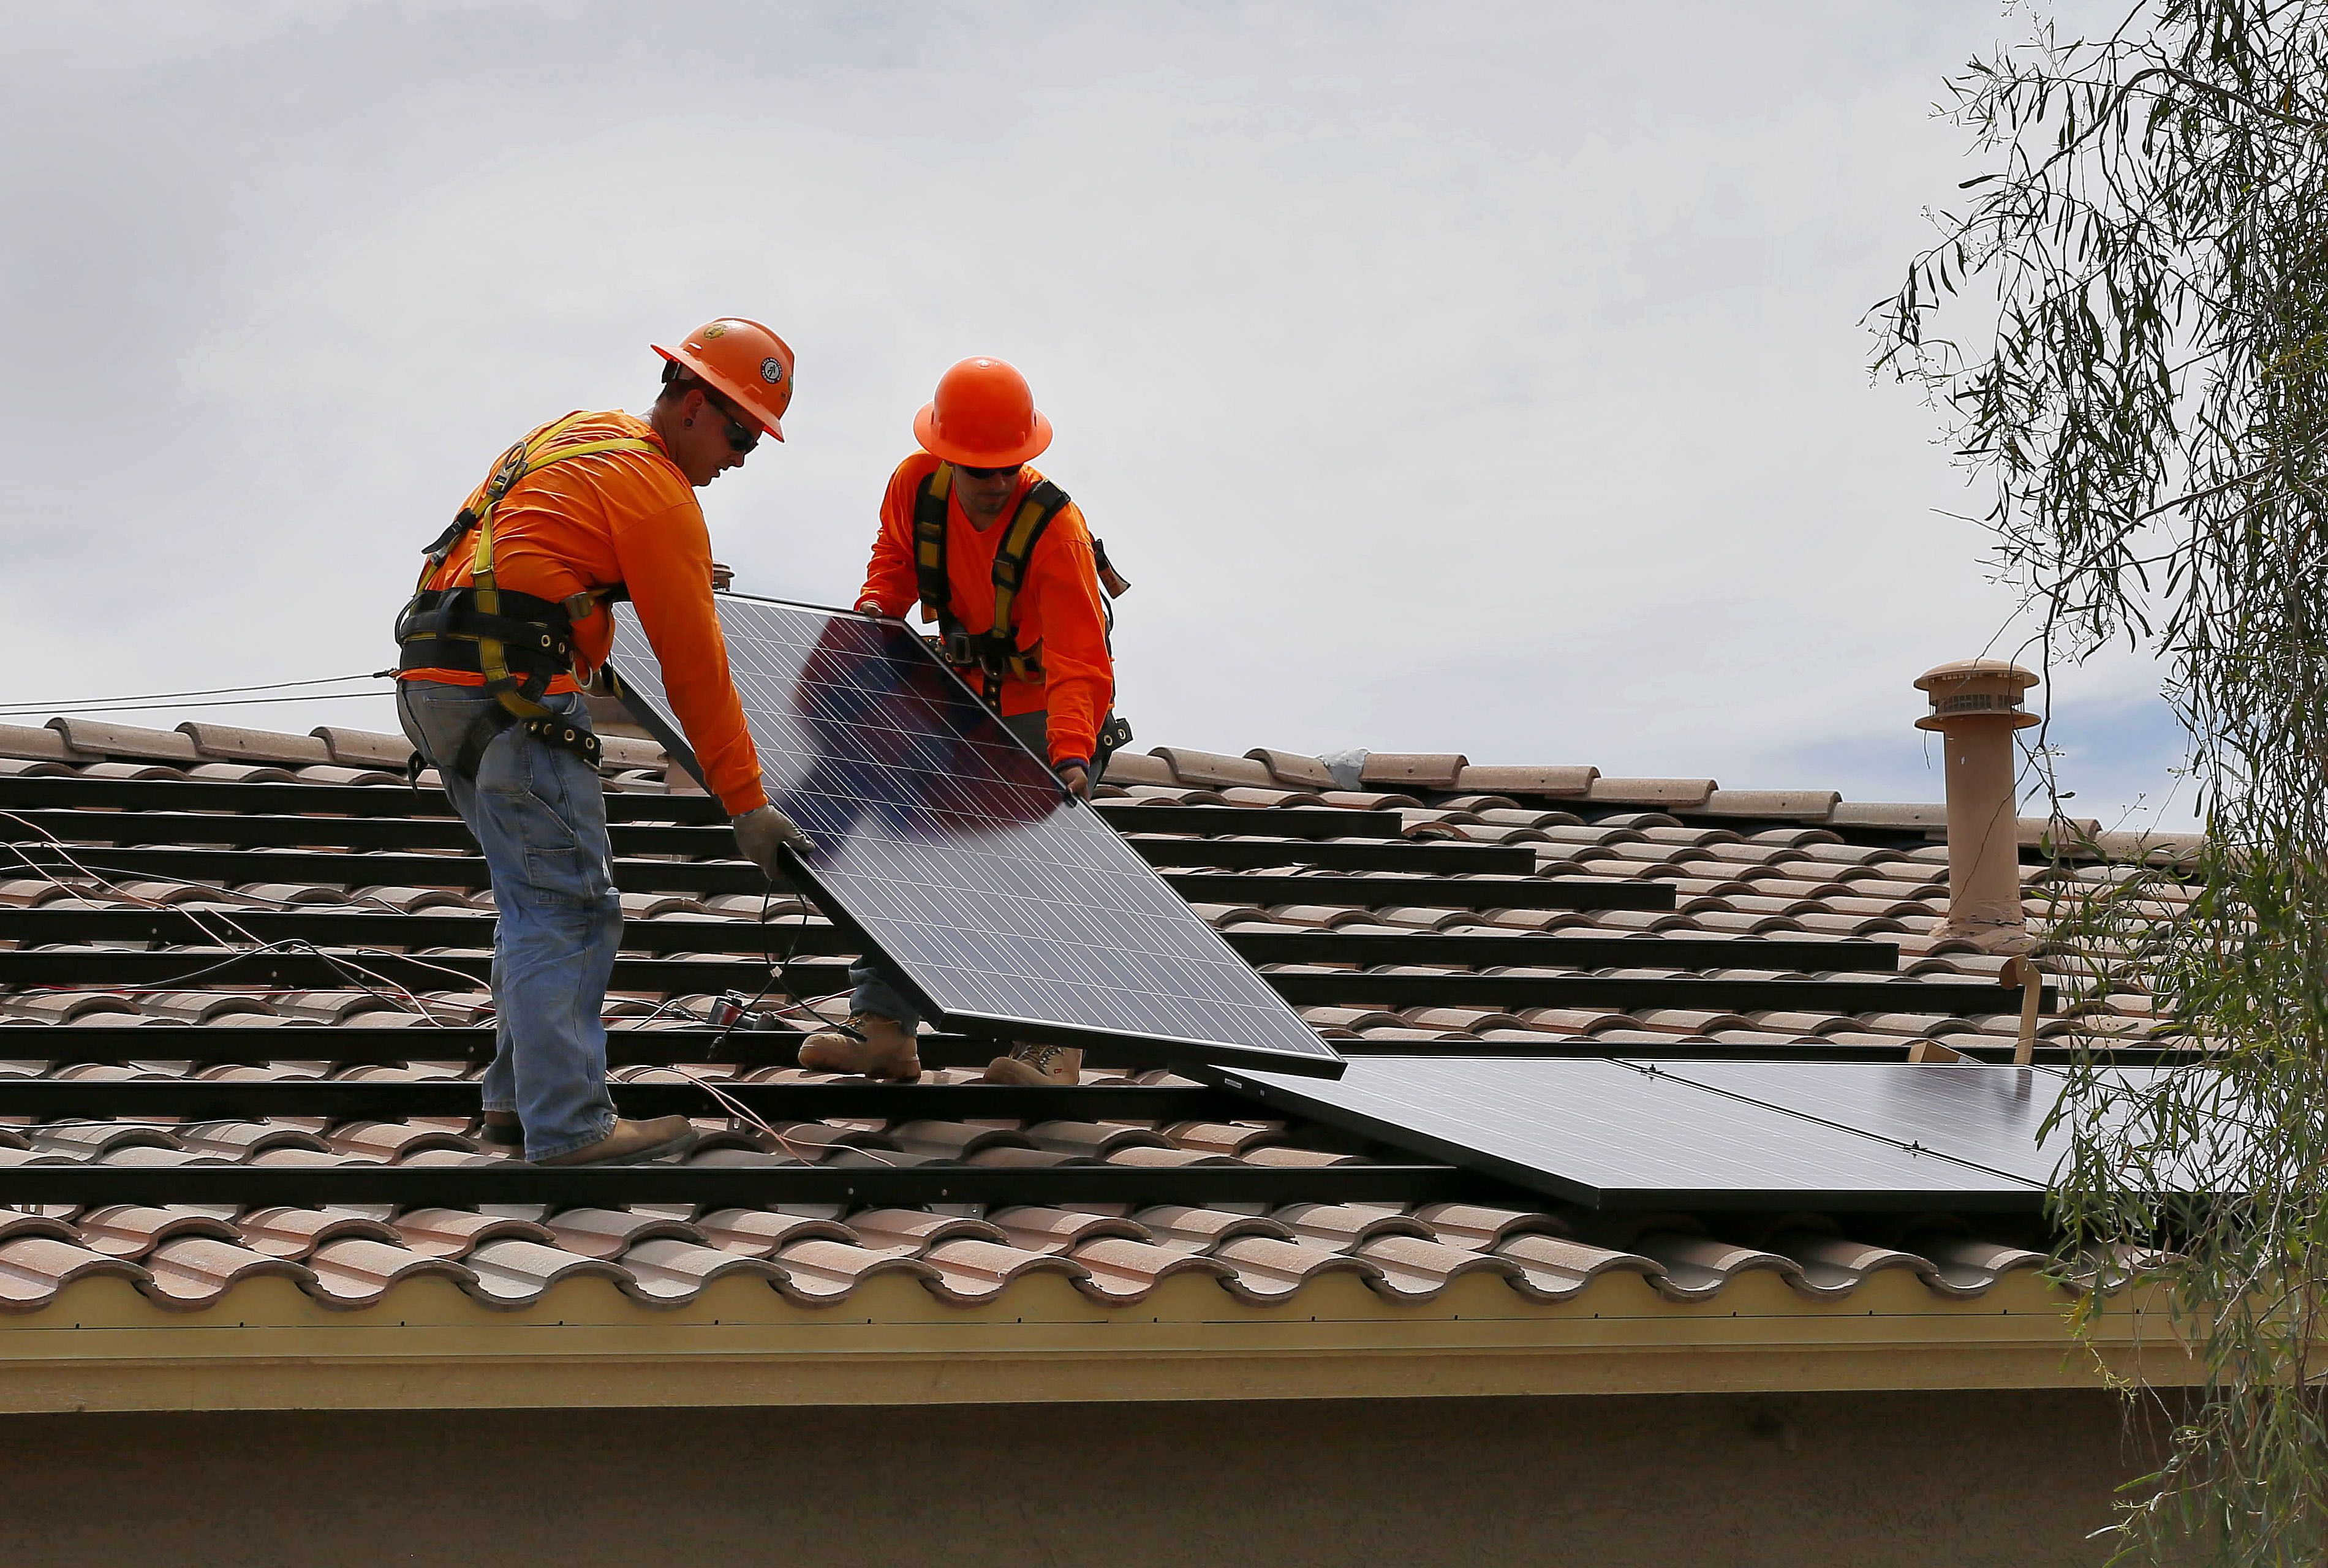 electricians Adam Hall, right, and Steven Gabert, install solar panels on a roof for Arizona Public Service company in Goodyear, Ariz. 